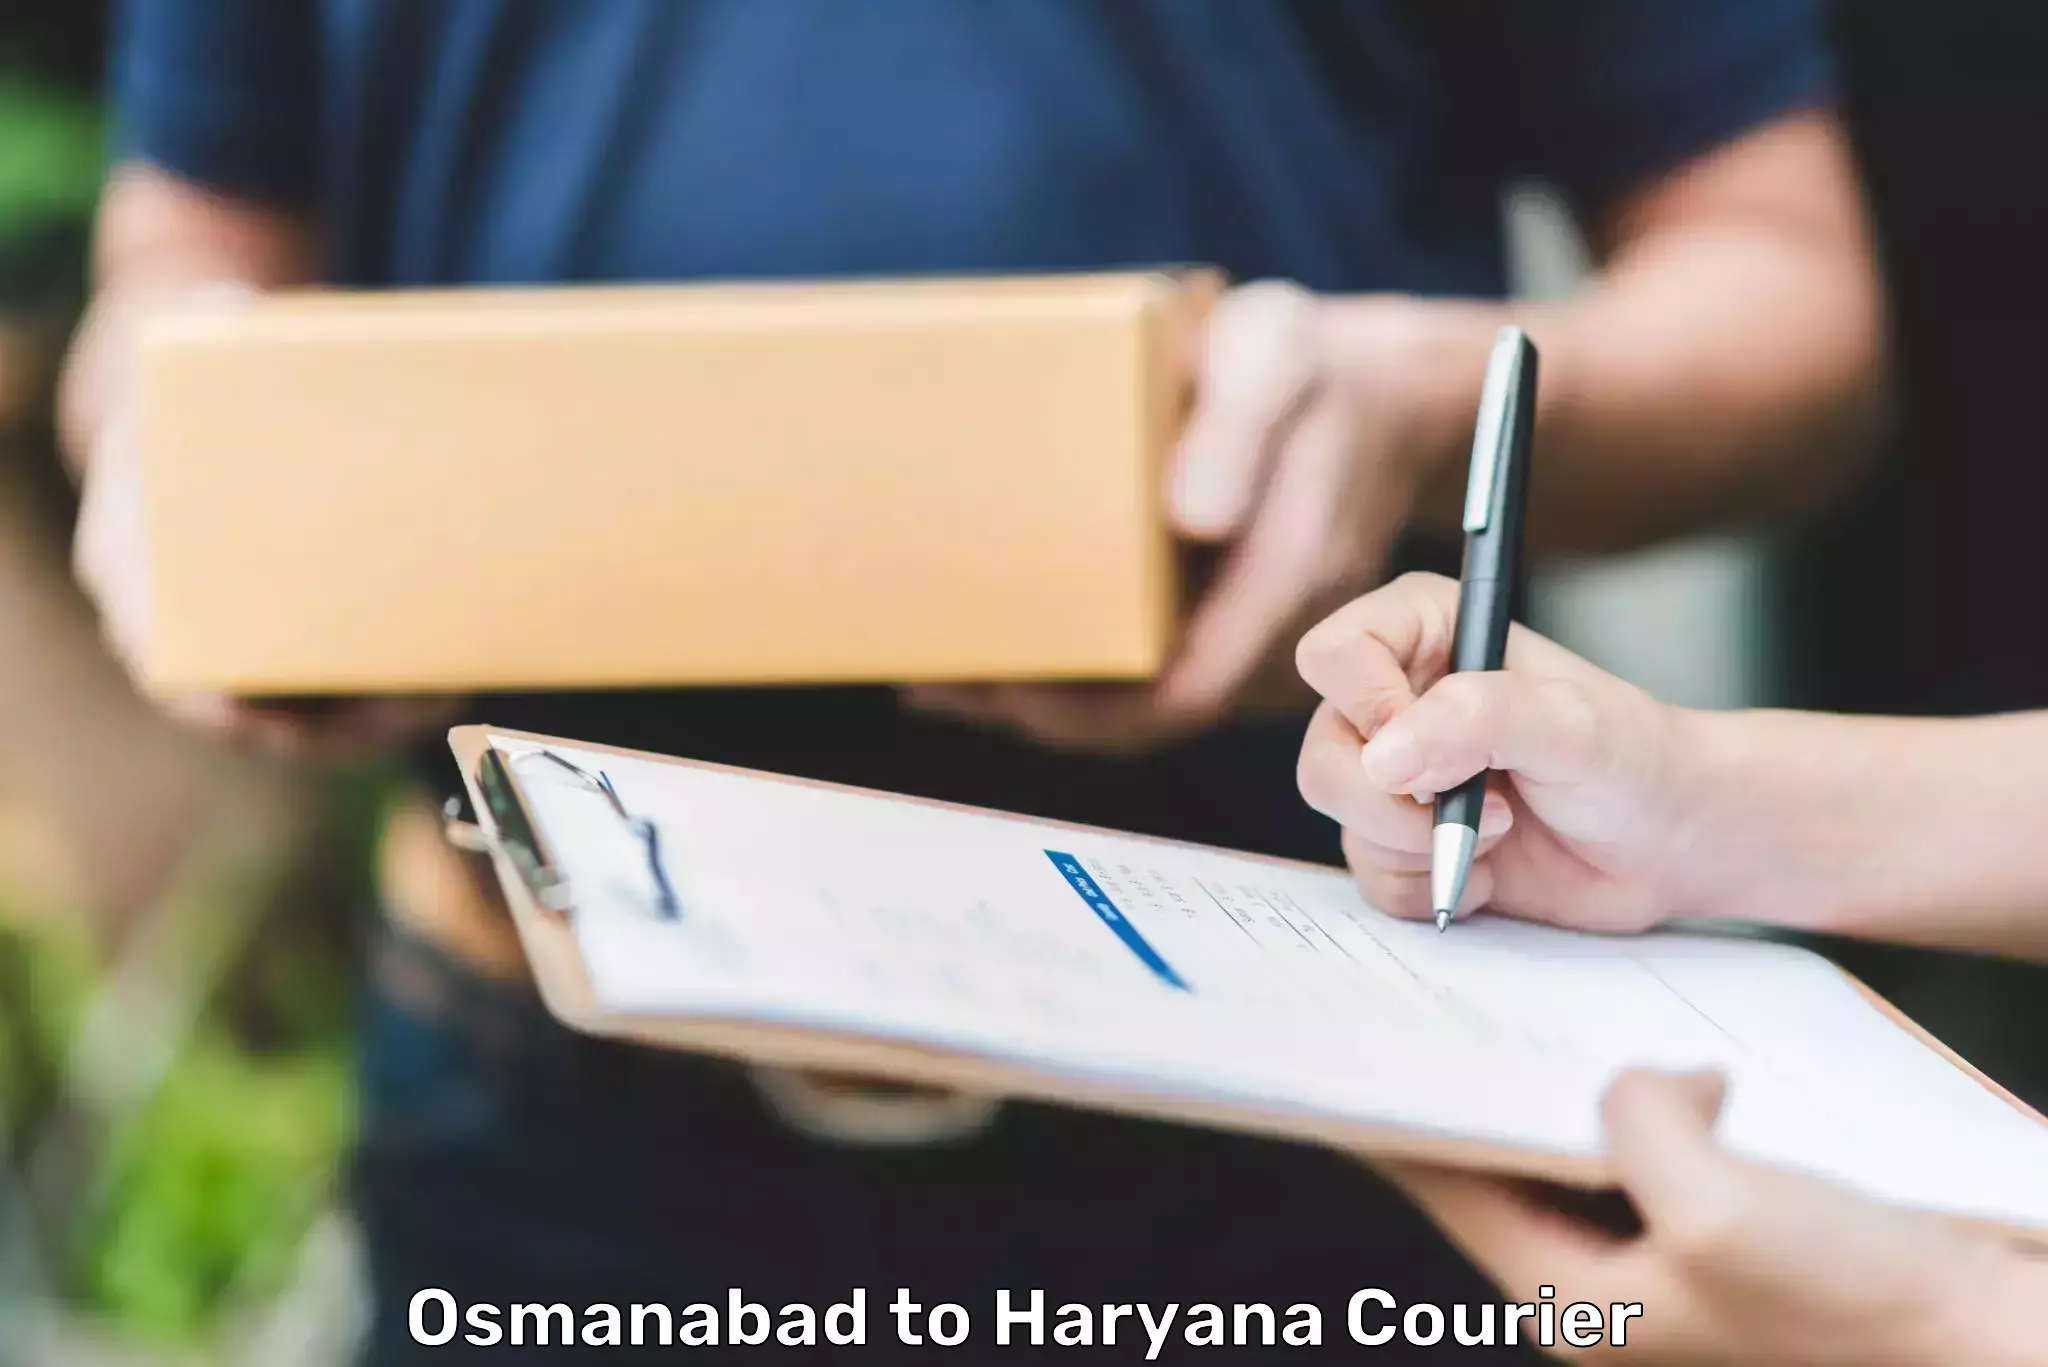 Courier service comparison Osmanabad to Haryana